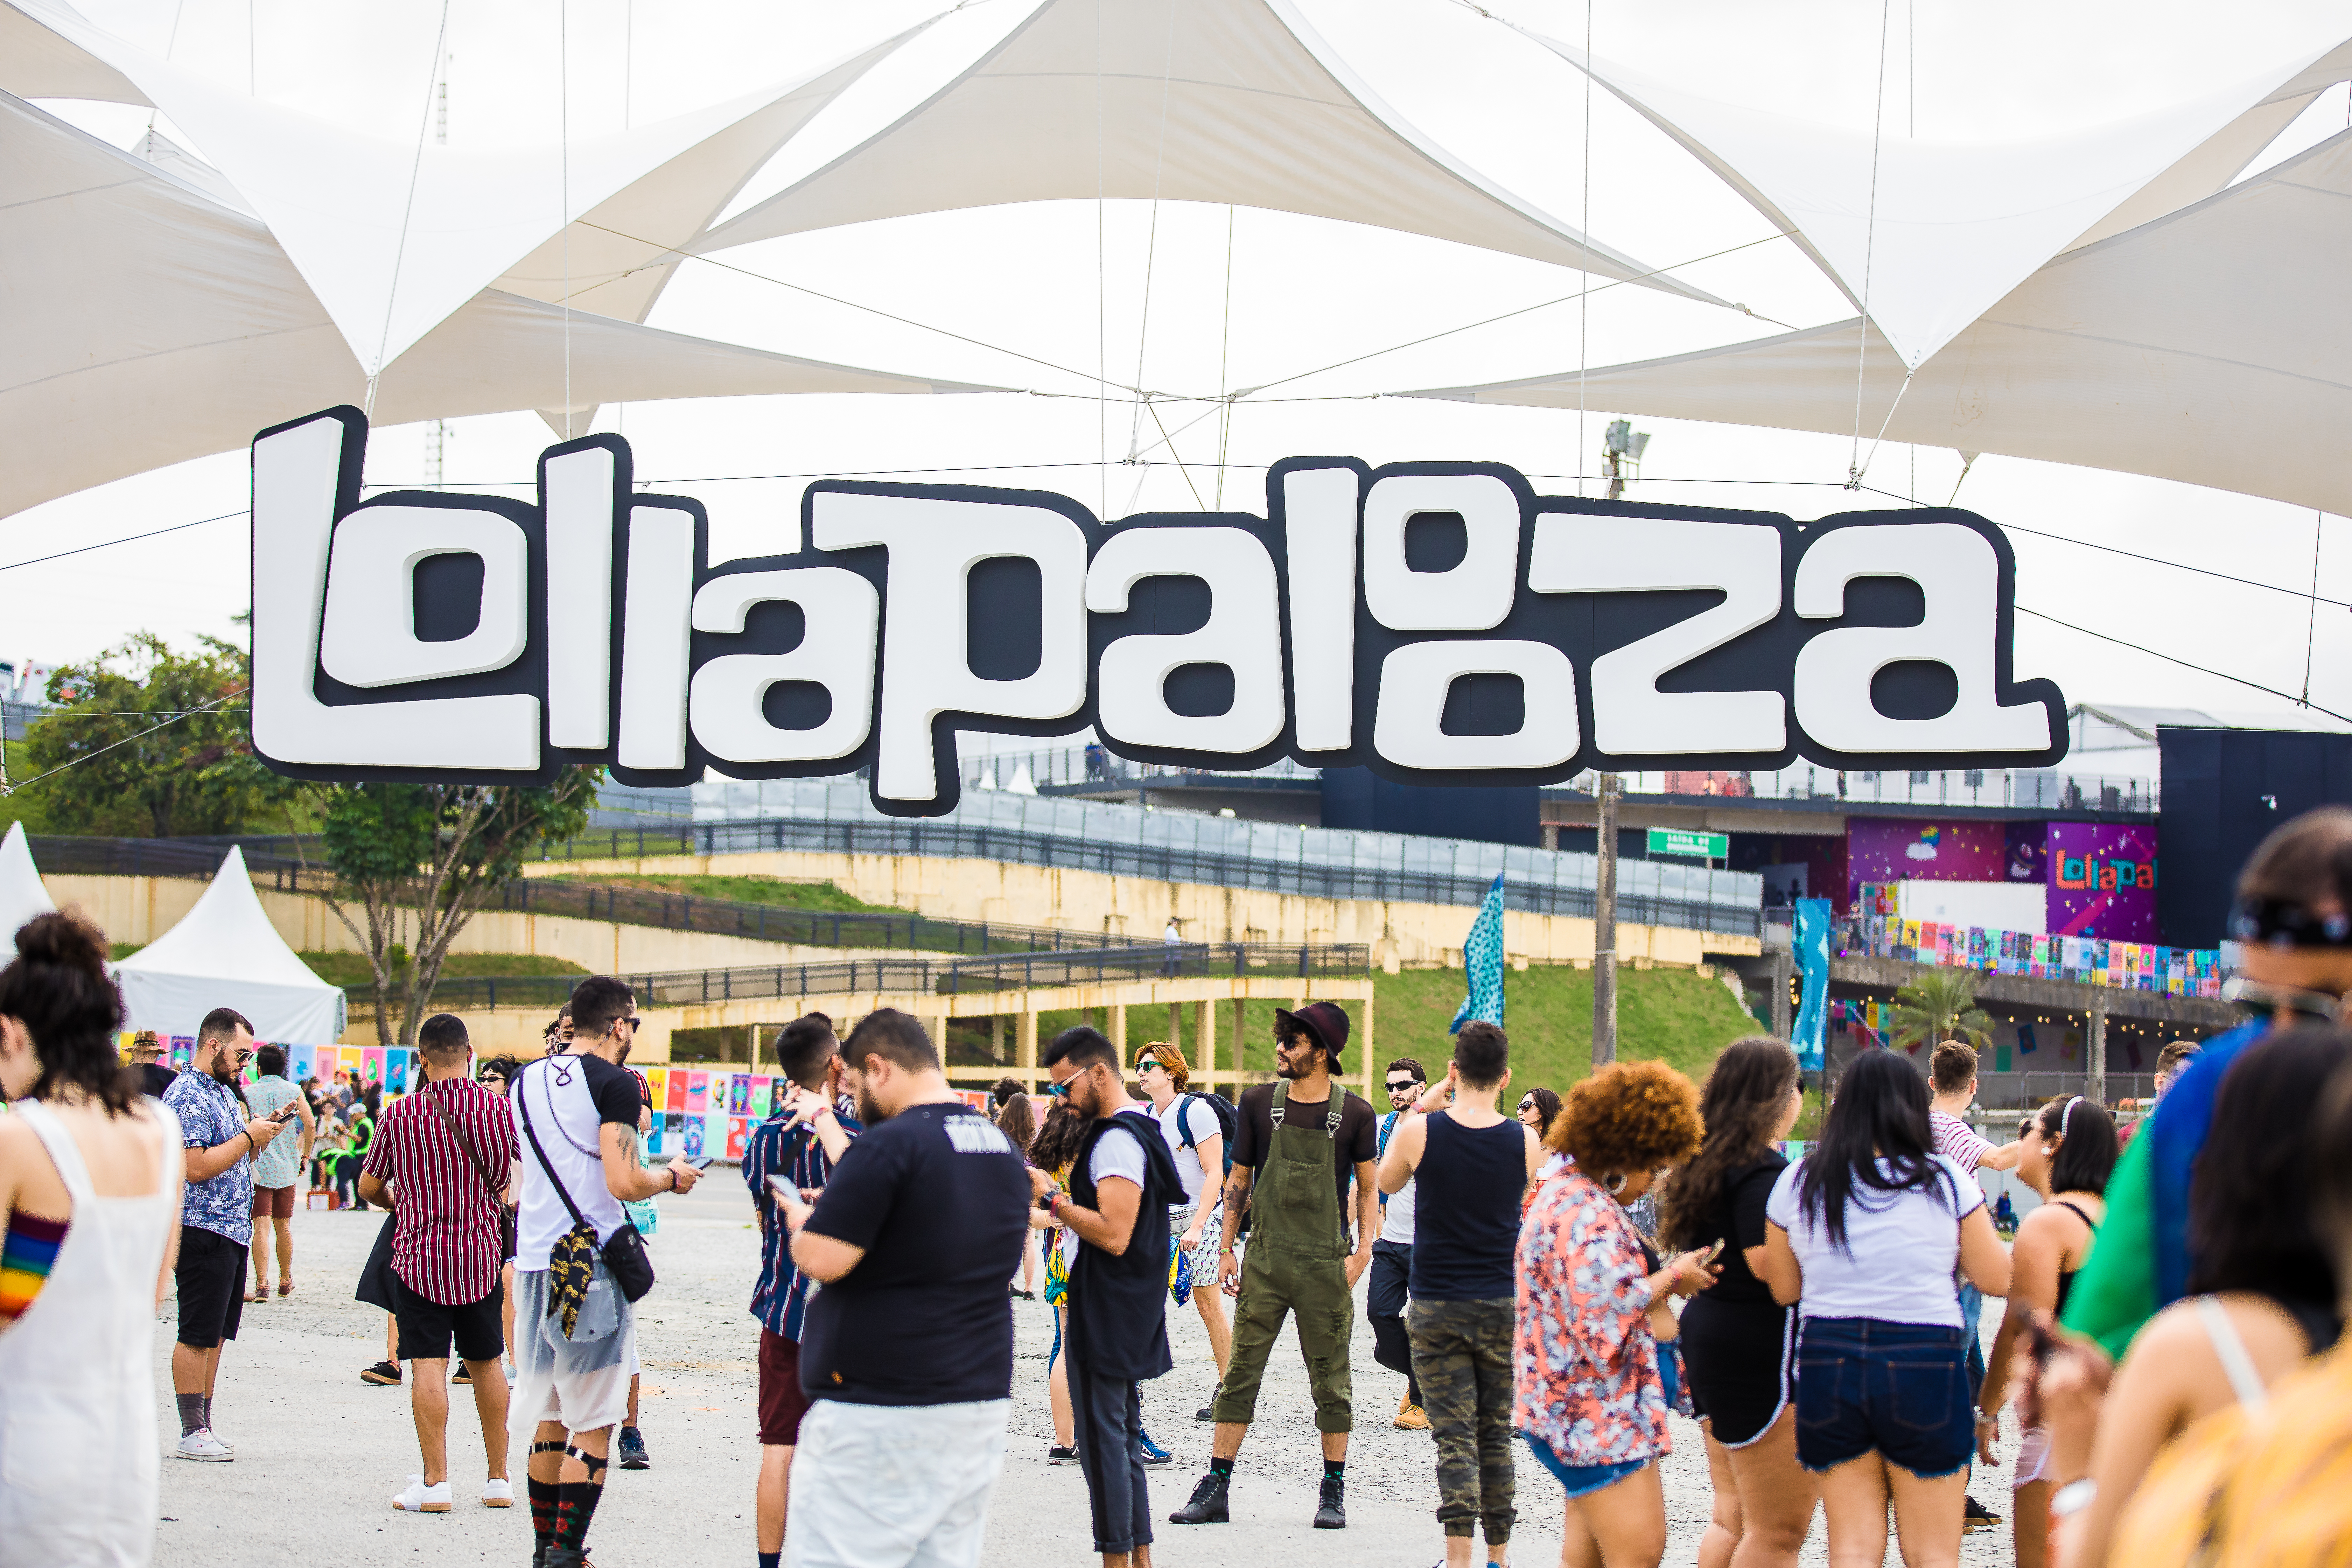 A general view of the Lollapalooza Logo entrance during the first day or day one of Lollapalooza Brazil Music Festival at Interlagos Racetrack on April 05, 2019 in Sao Paulo, Brazil. (Photo by Mauricio Santana/Getty Images)